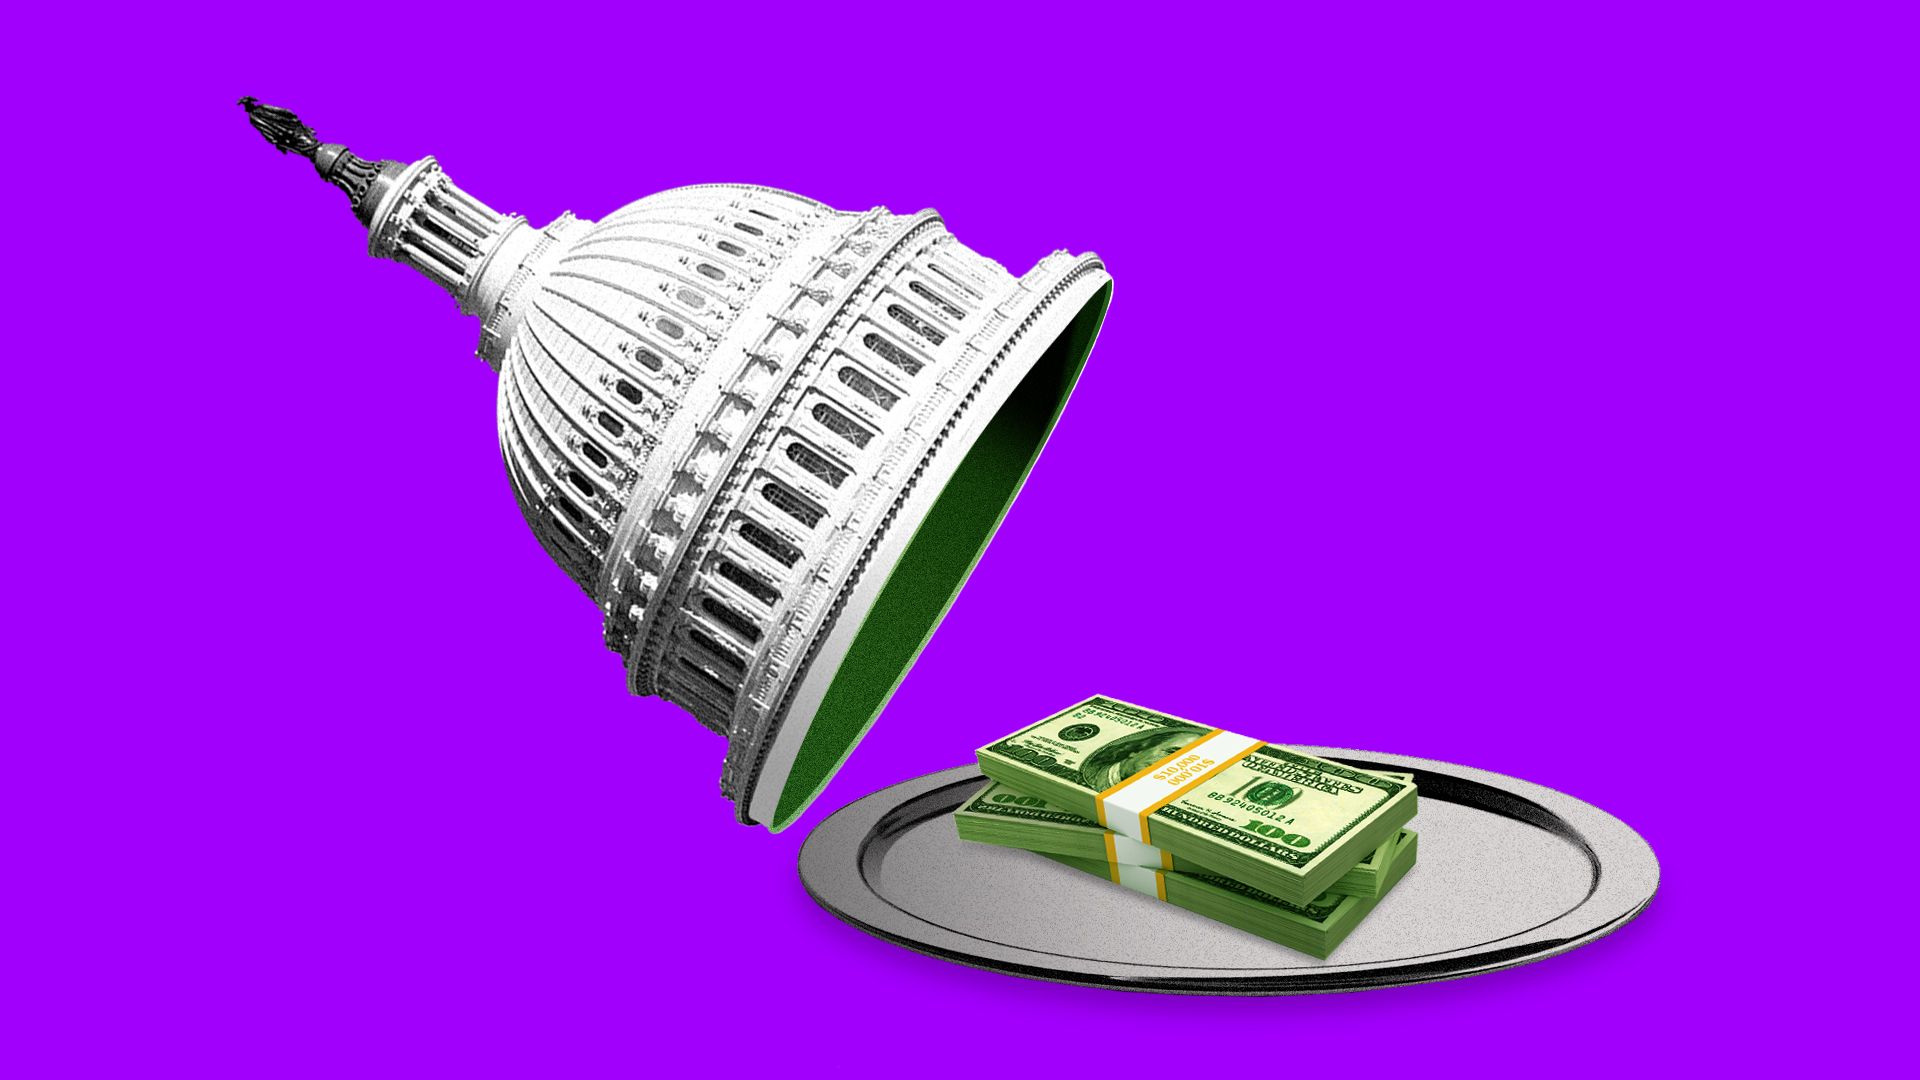 Illustration of Congress cloche lifting up to show stack of money.